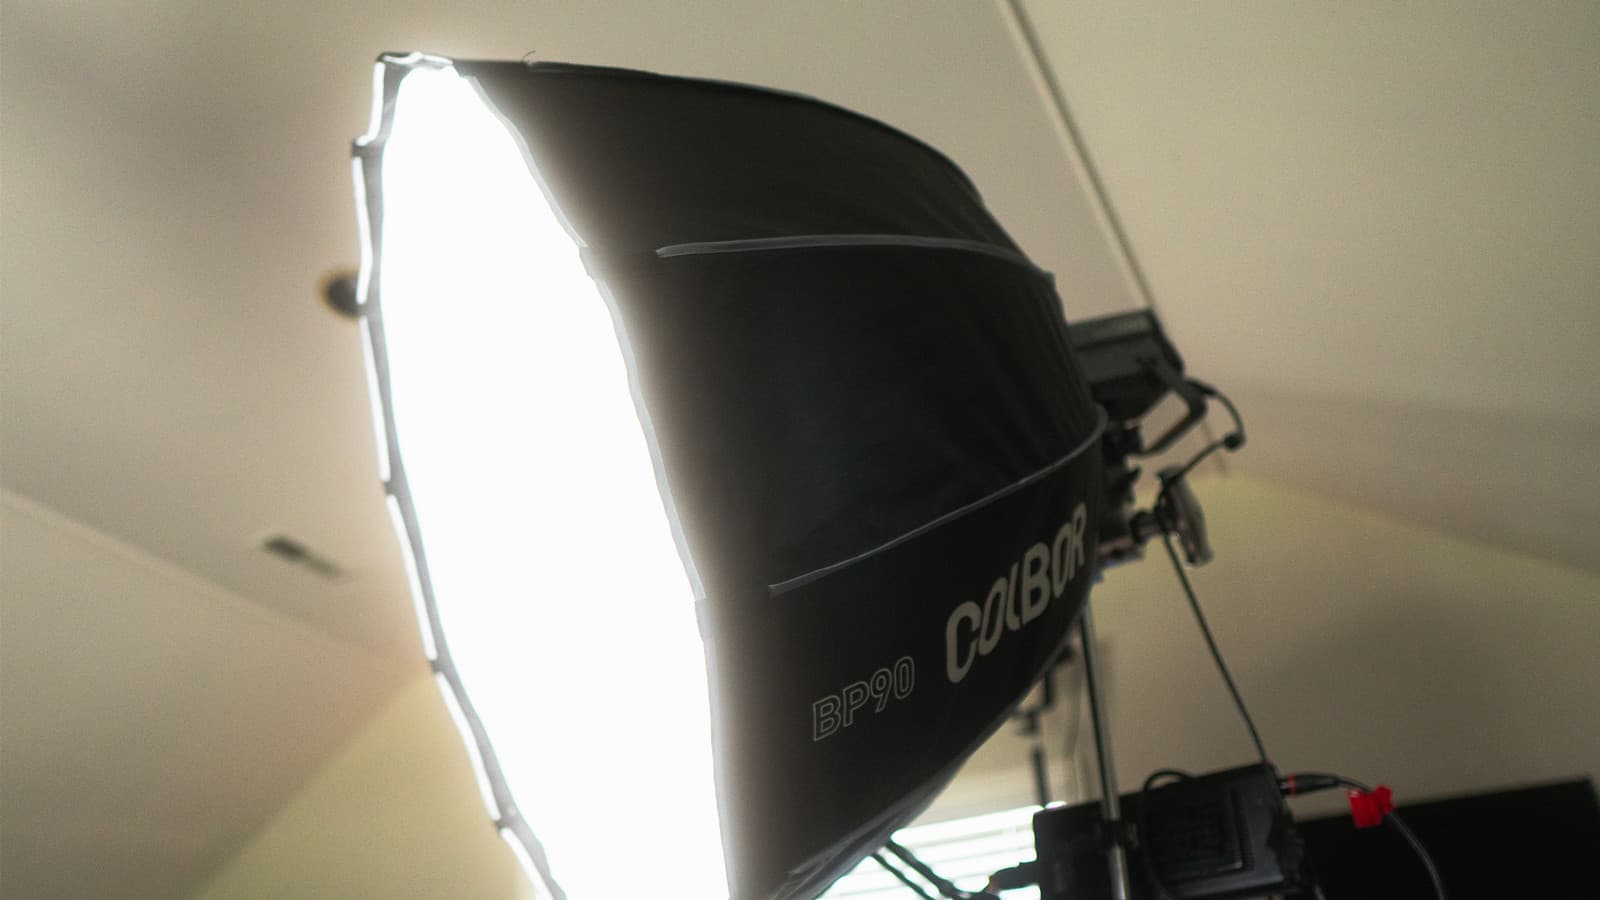 COLBOR CL220 is used with a softbox to create soft side lighting for photography.